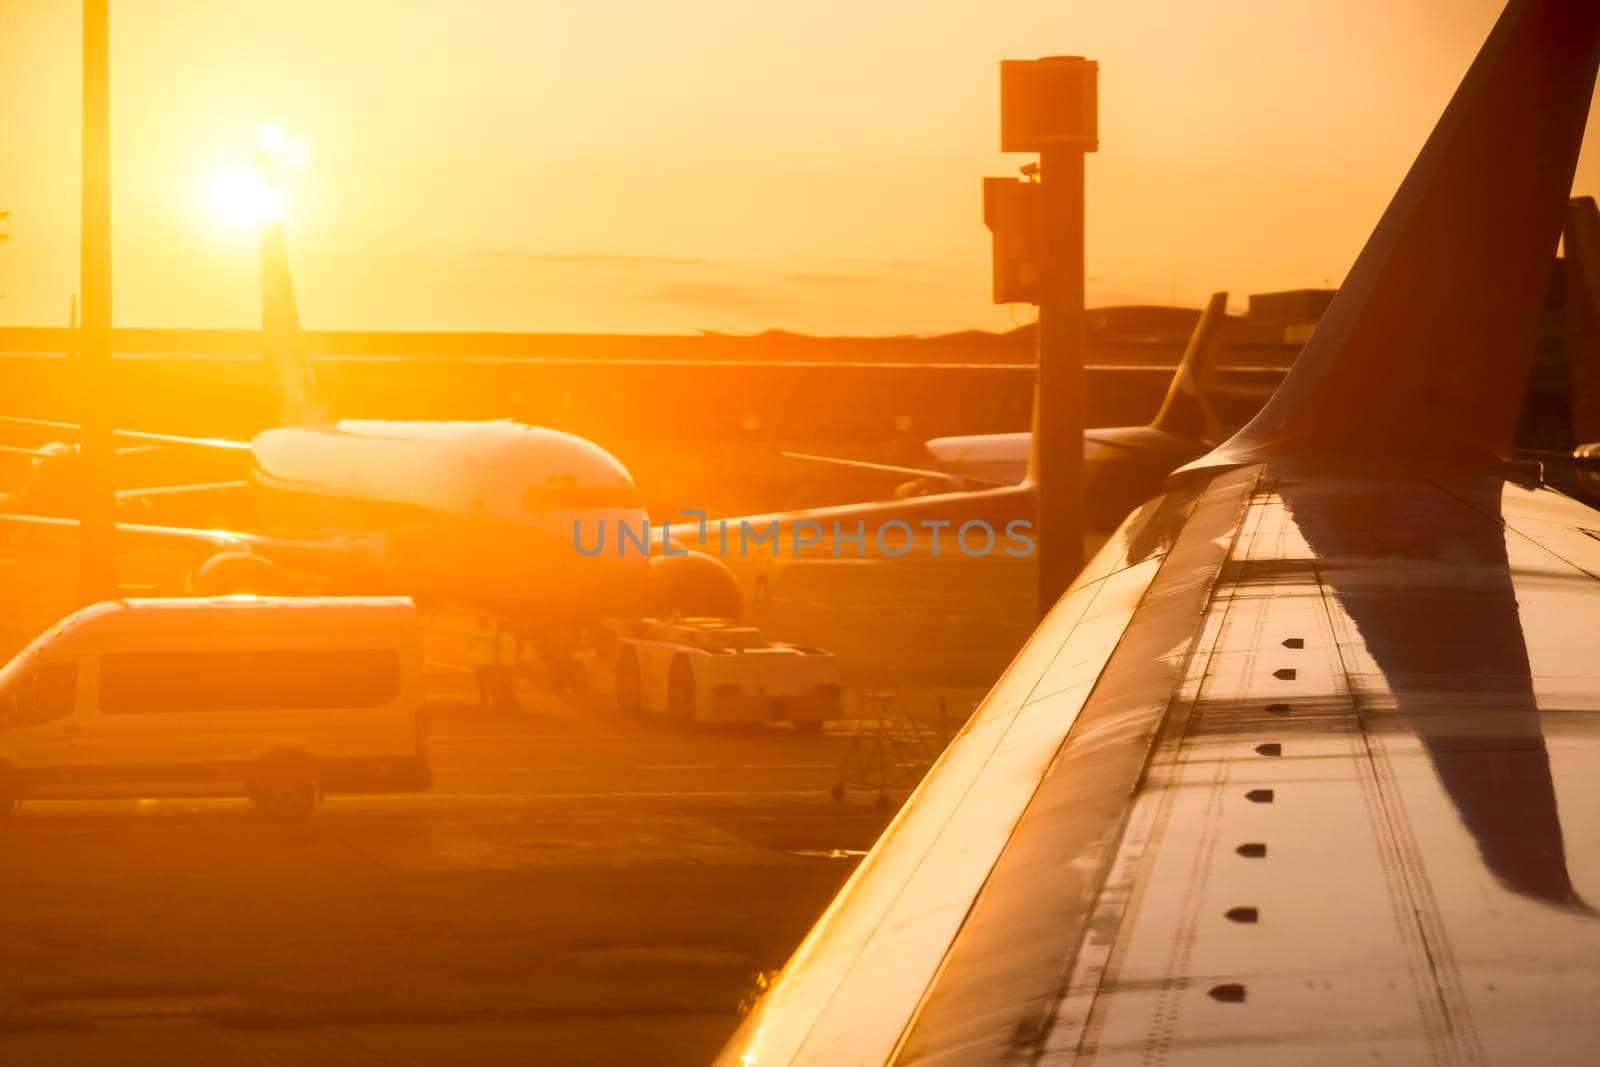 Airplanes on the runway at sunset by africapink